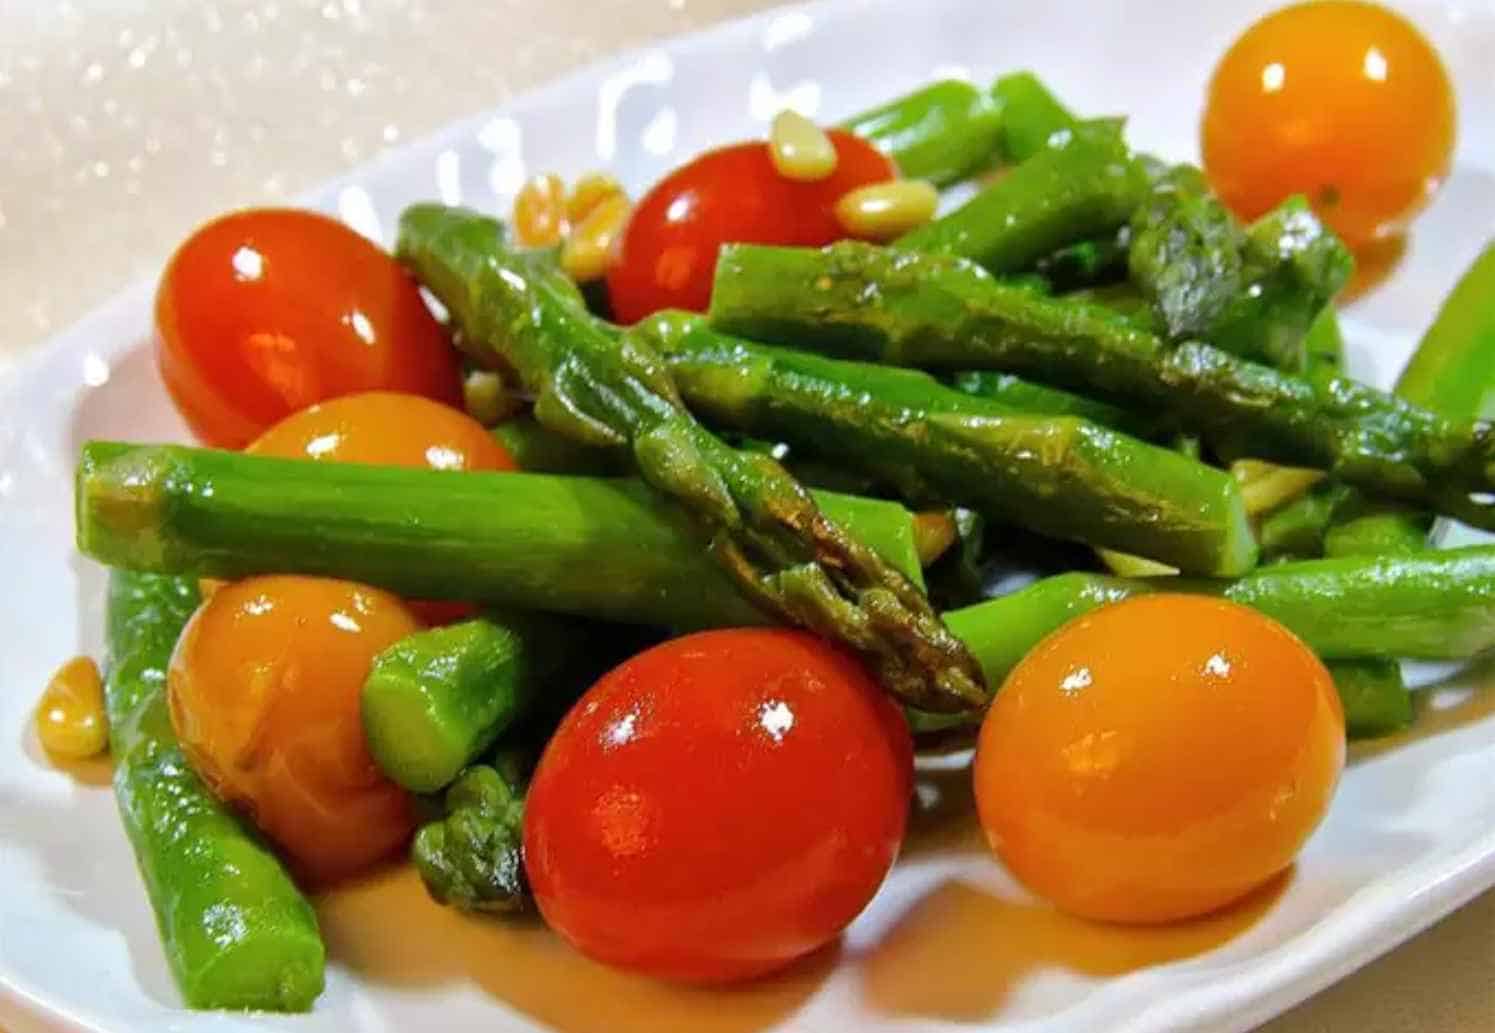 Parmesan Asparagus with Tomatoes